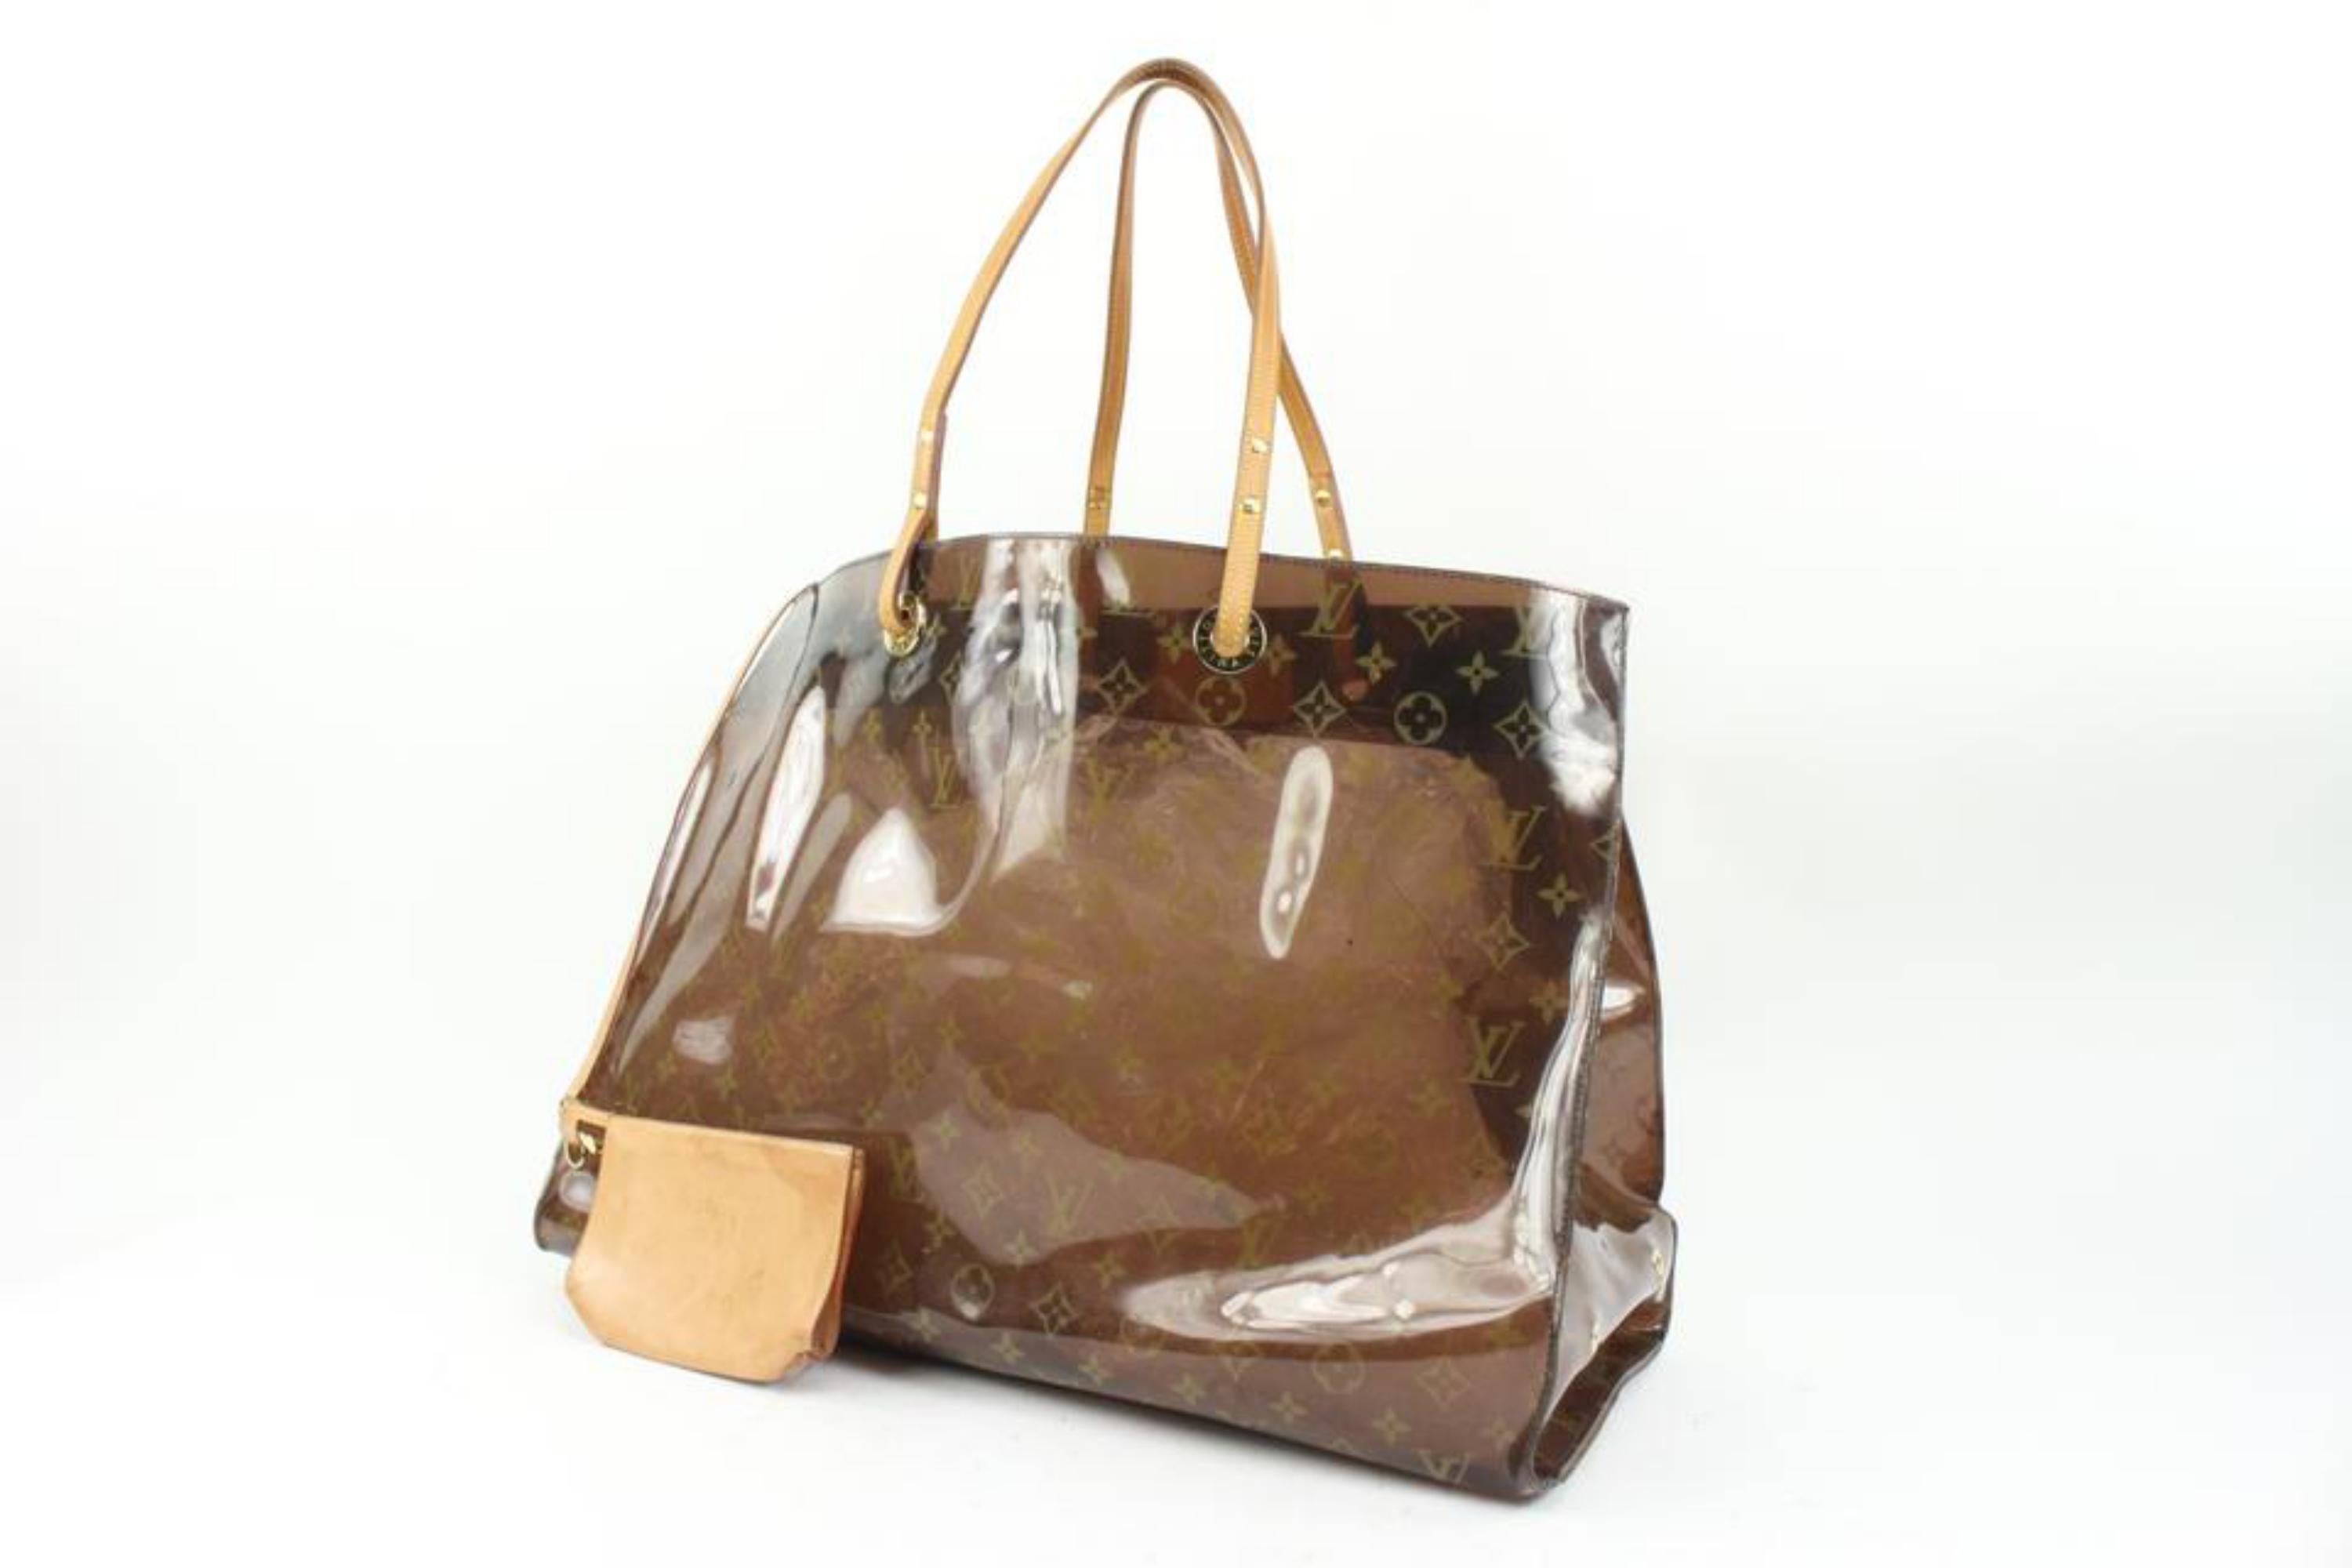 Louis Vuitton Clear Translucent Monogram Ambre Cabas Cruise GM Tote w Pouch 17lv216s
Date Code/Serial Number: LW0030
Made In: Spain
Measurements: Length:  18.5